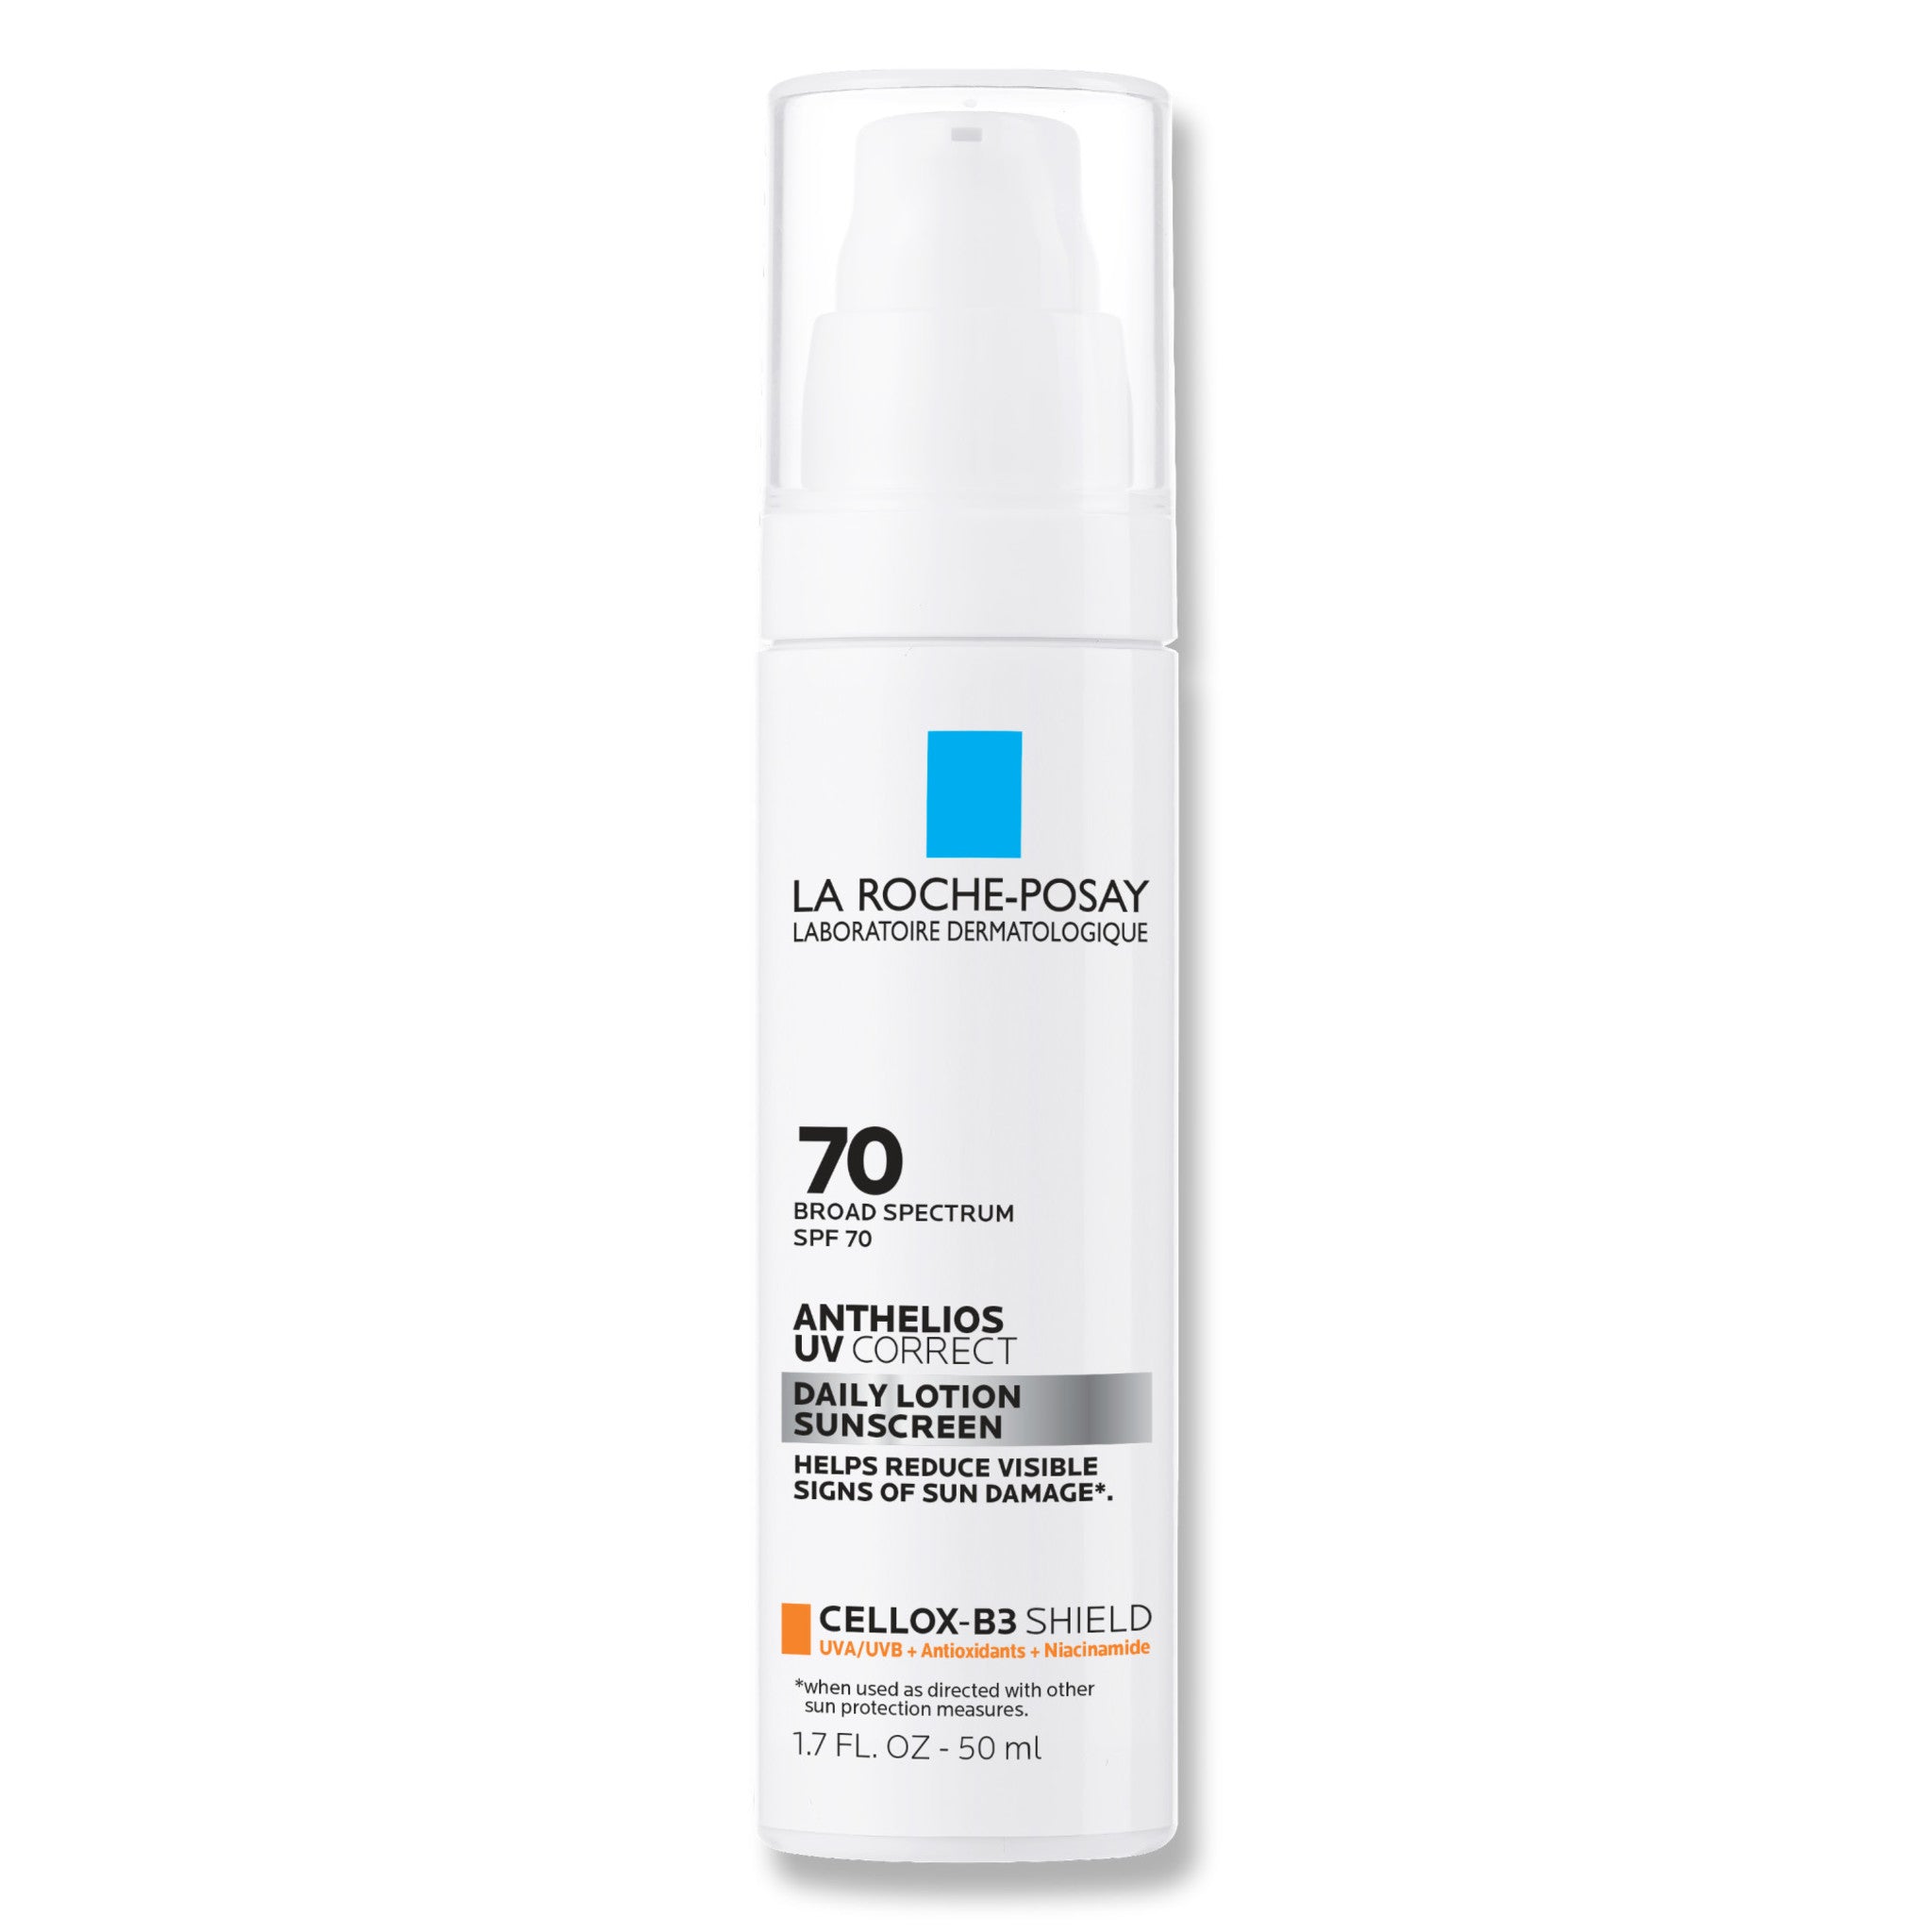 Print Drikke sig fuld tåbelig La Roche-Posay Anthelios UV Correct Daily Face Sunscreen With Niacinamide  SPF 70 – bluemercury